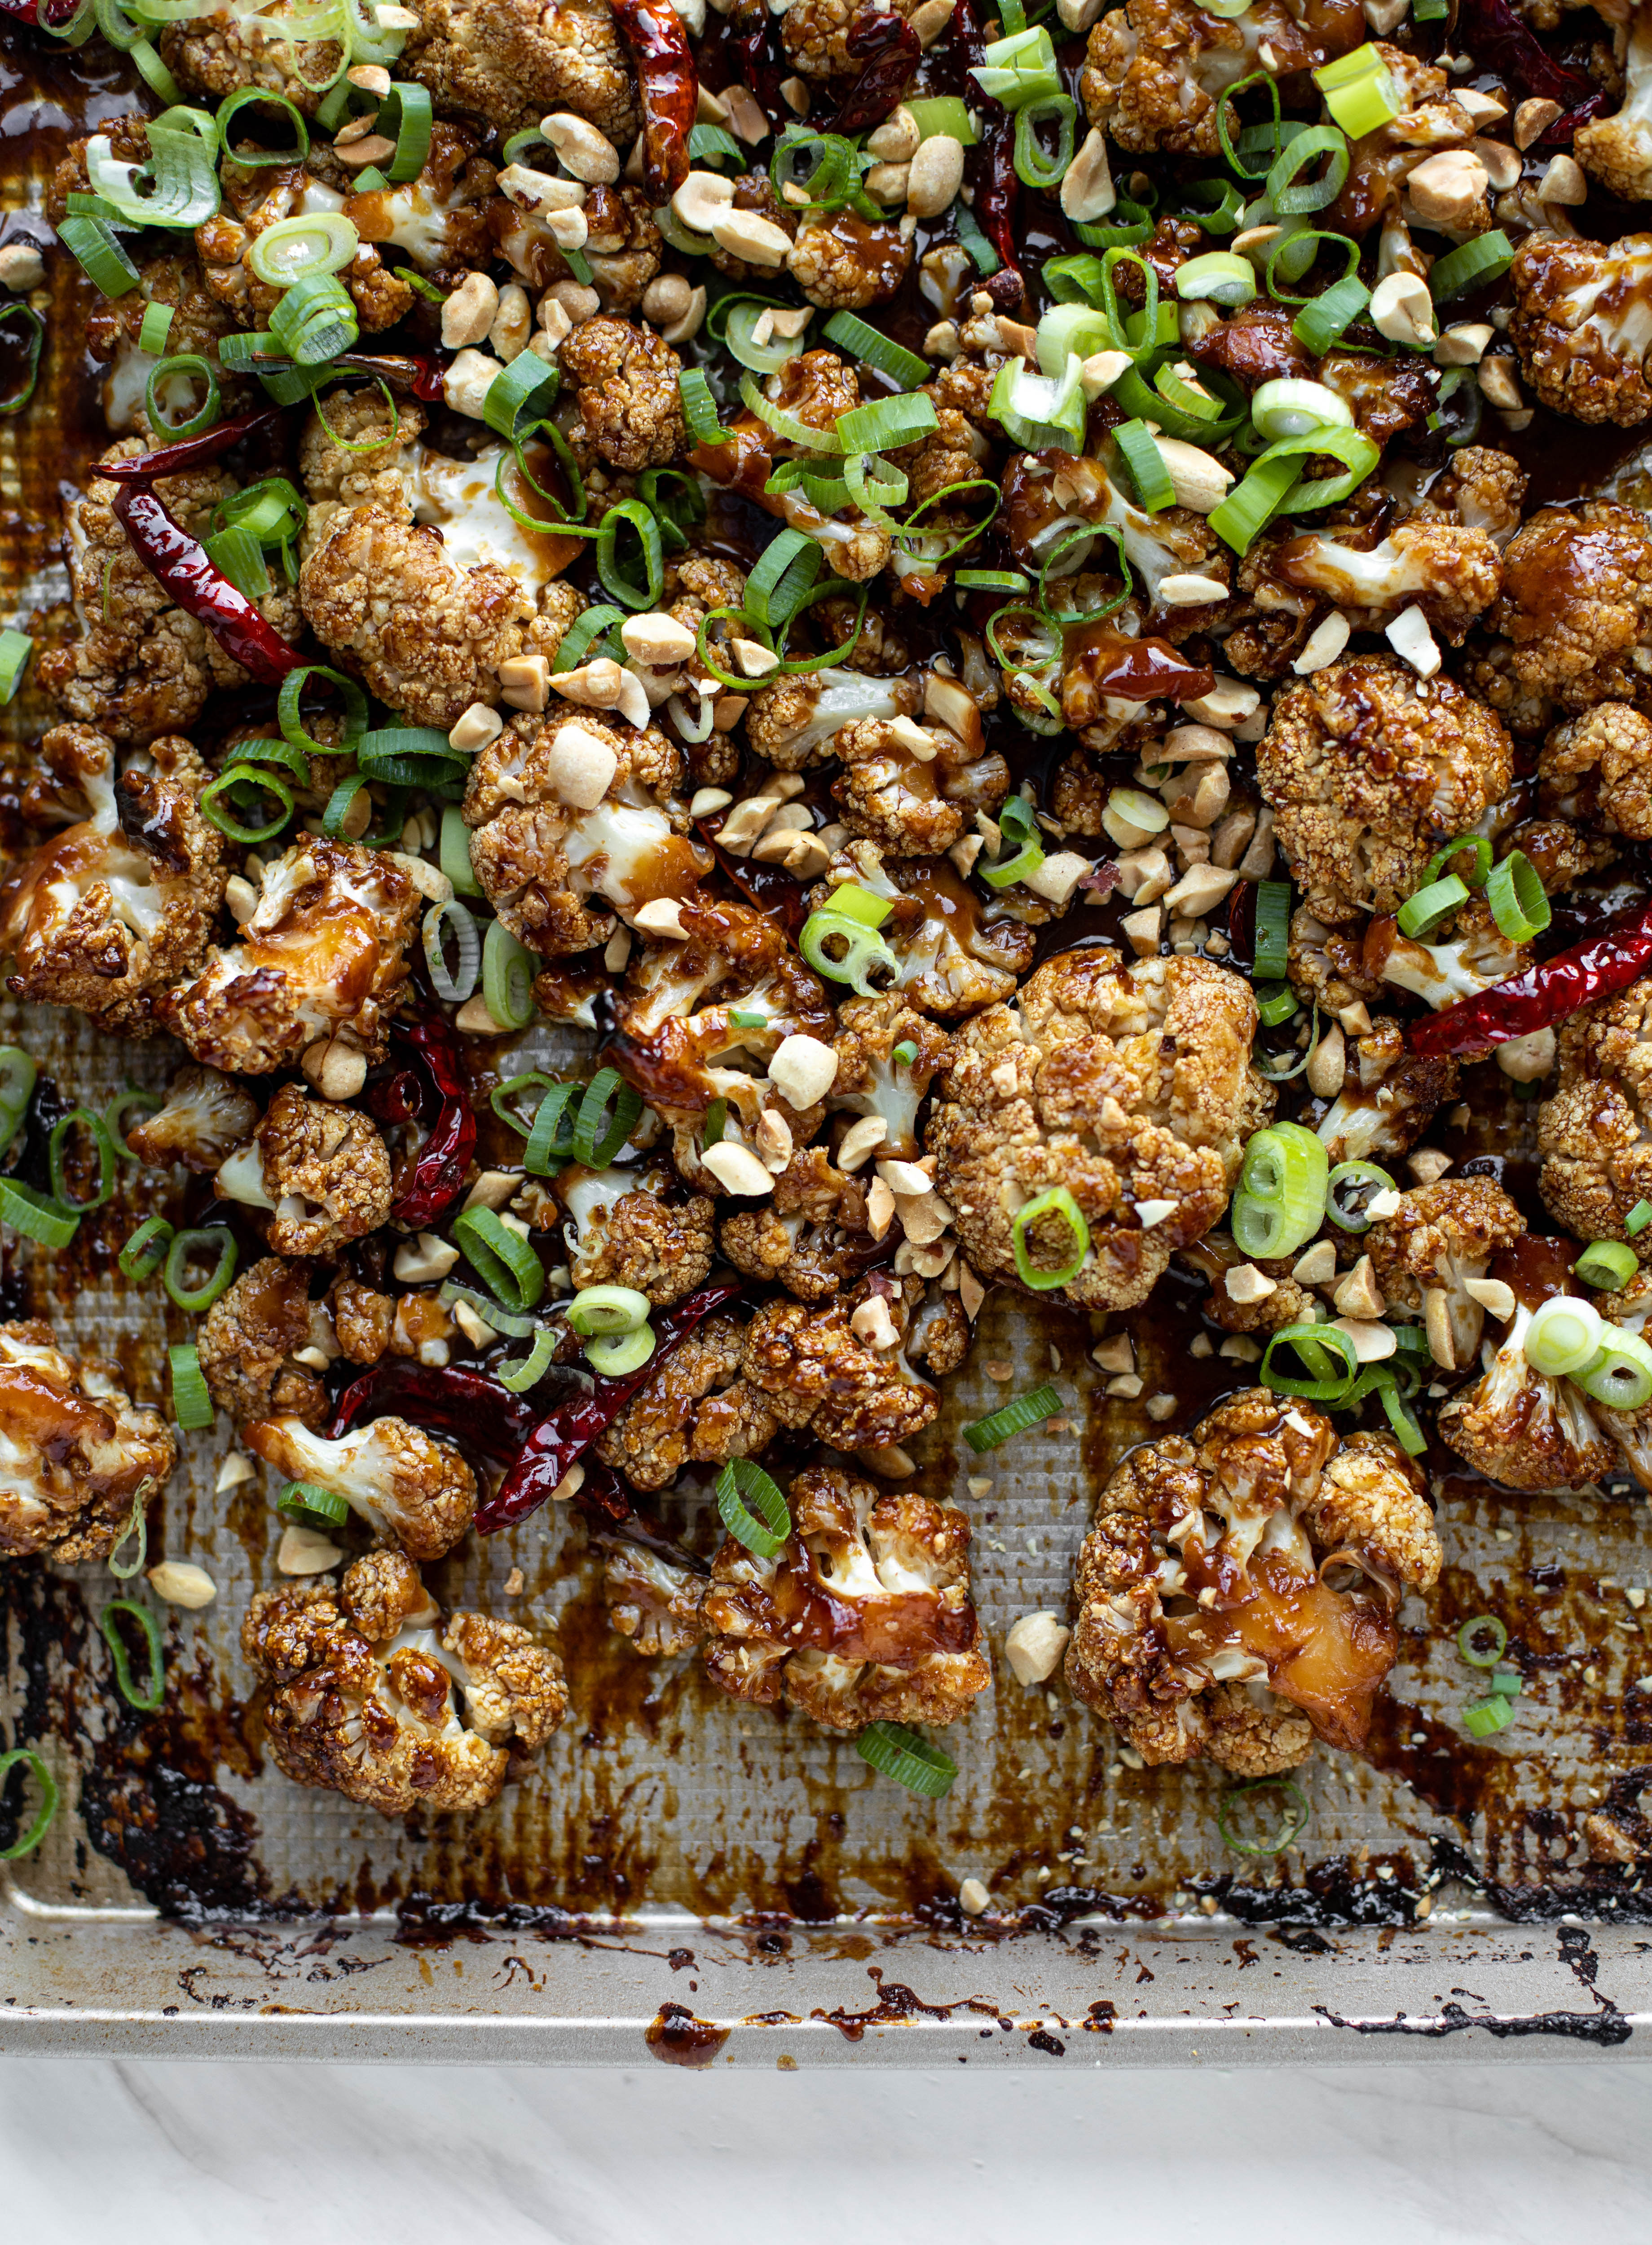 This kung pao cauliflower recipe is roasted on one sheet pan and covered in a delicious sauce! Serve alongside jasmine rice for the best dinner ever.